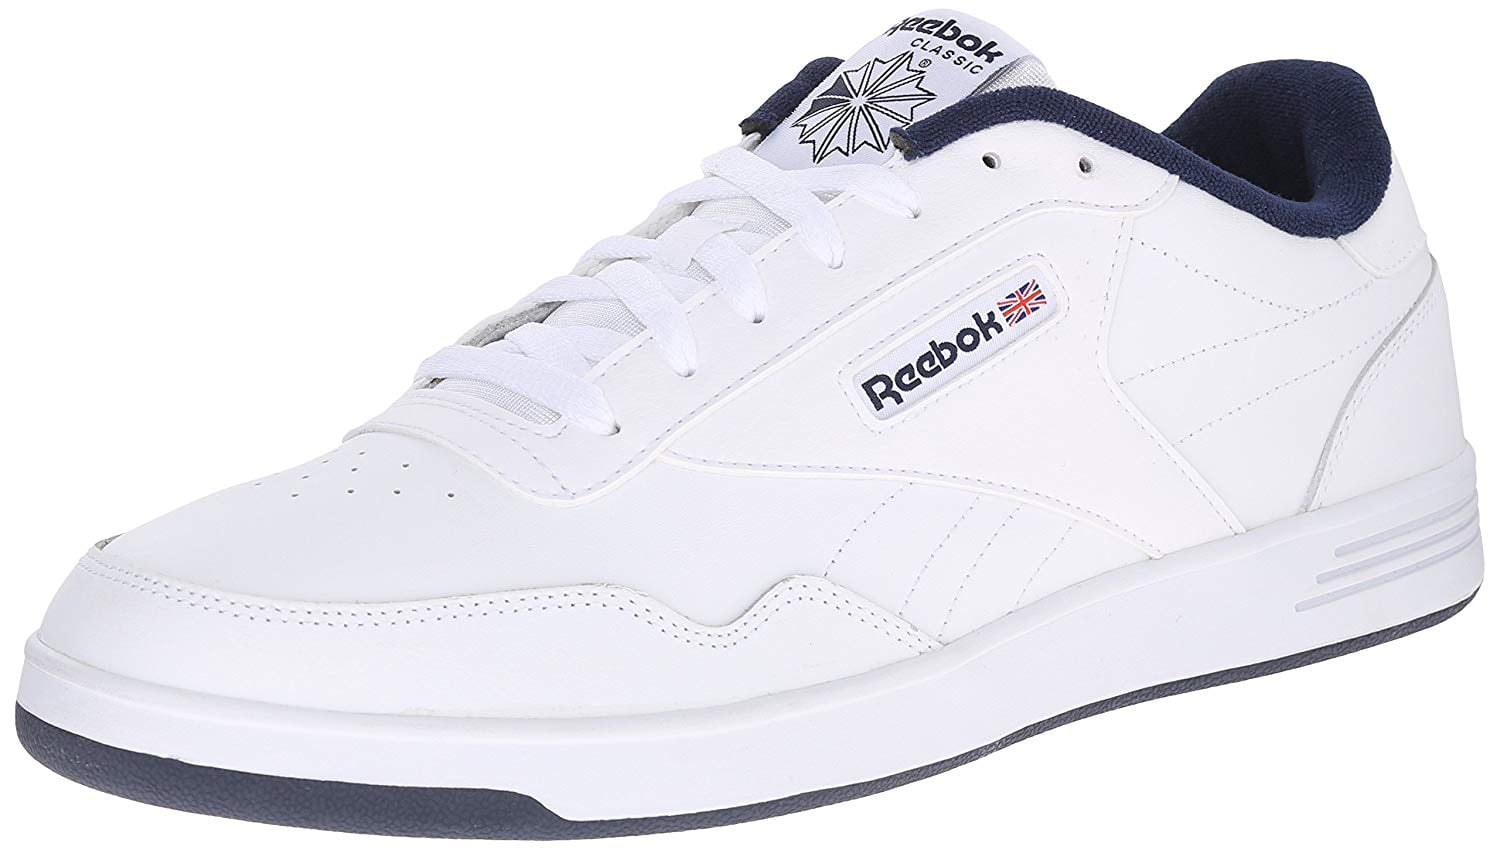 Reebok Shoes For Men : REEBOK Running Shoes & Sports Shoes - Score on